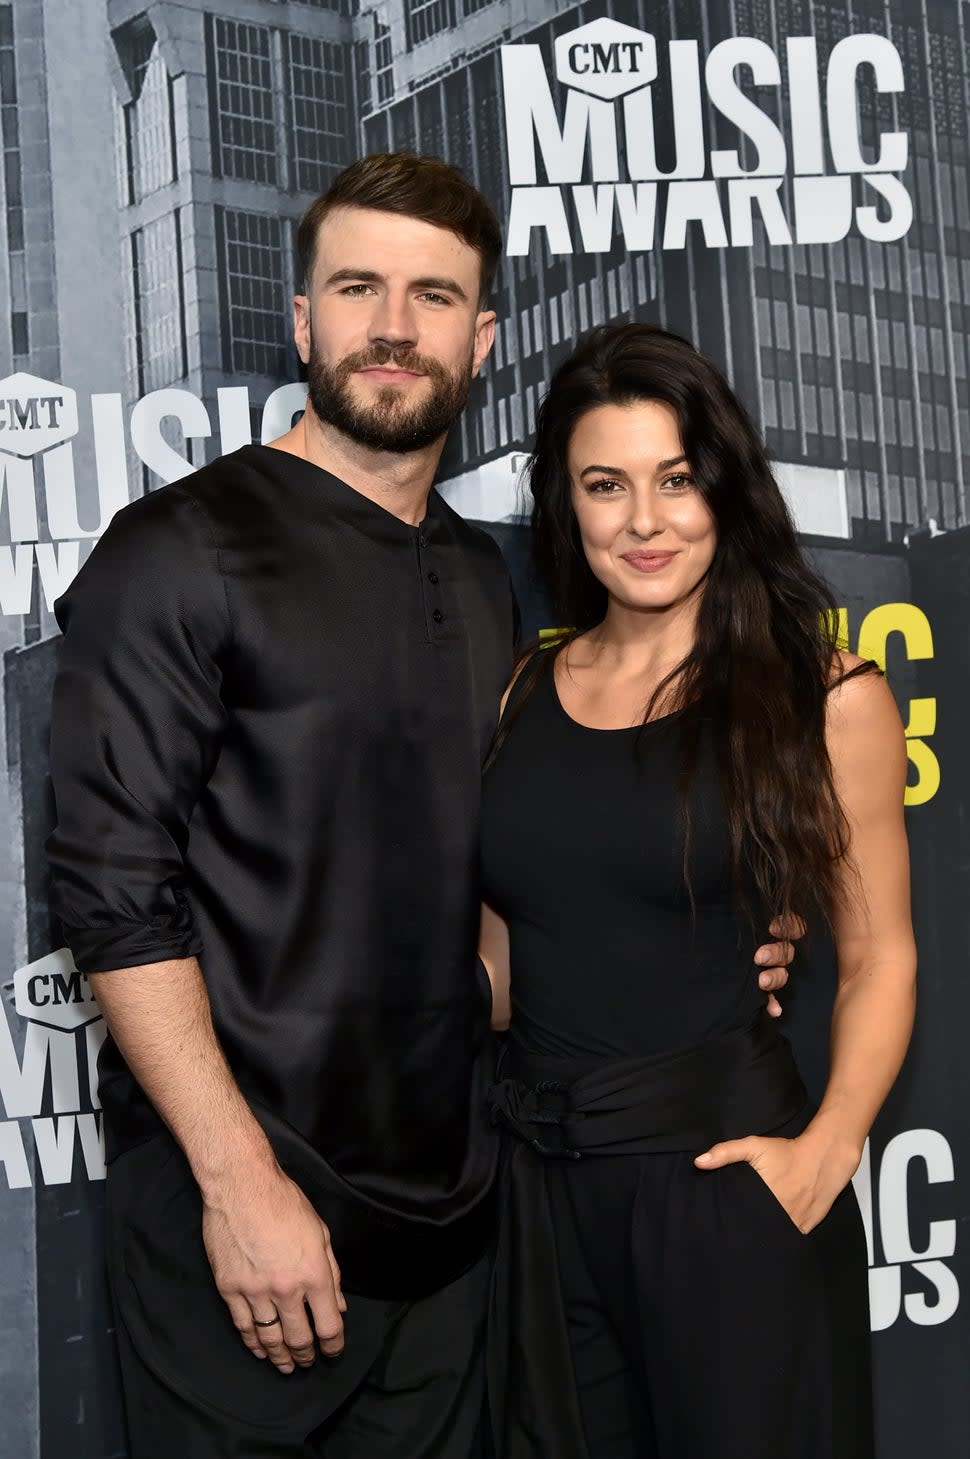  Singer-songwriter Sam Hunt and Hannah Lee Fowler attend the 2017 CMT Music Awards at the Music City Center on June 7, 2017 in Nashville, Tennessee.